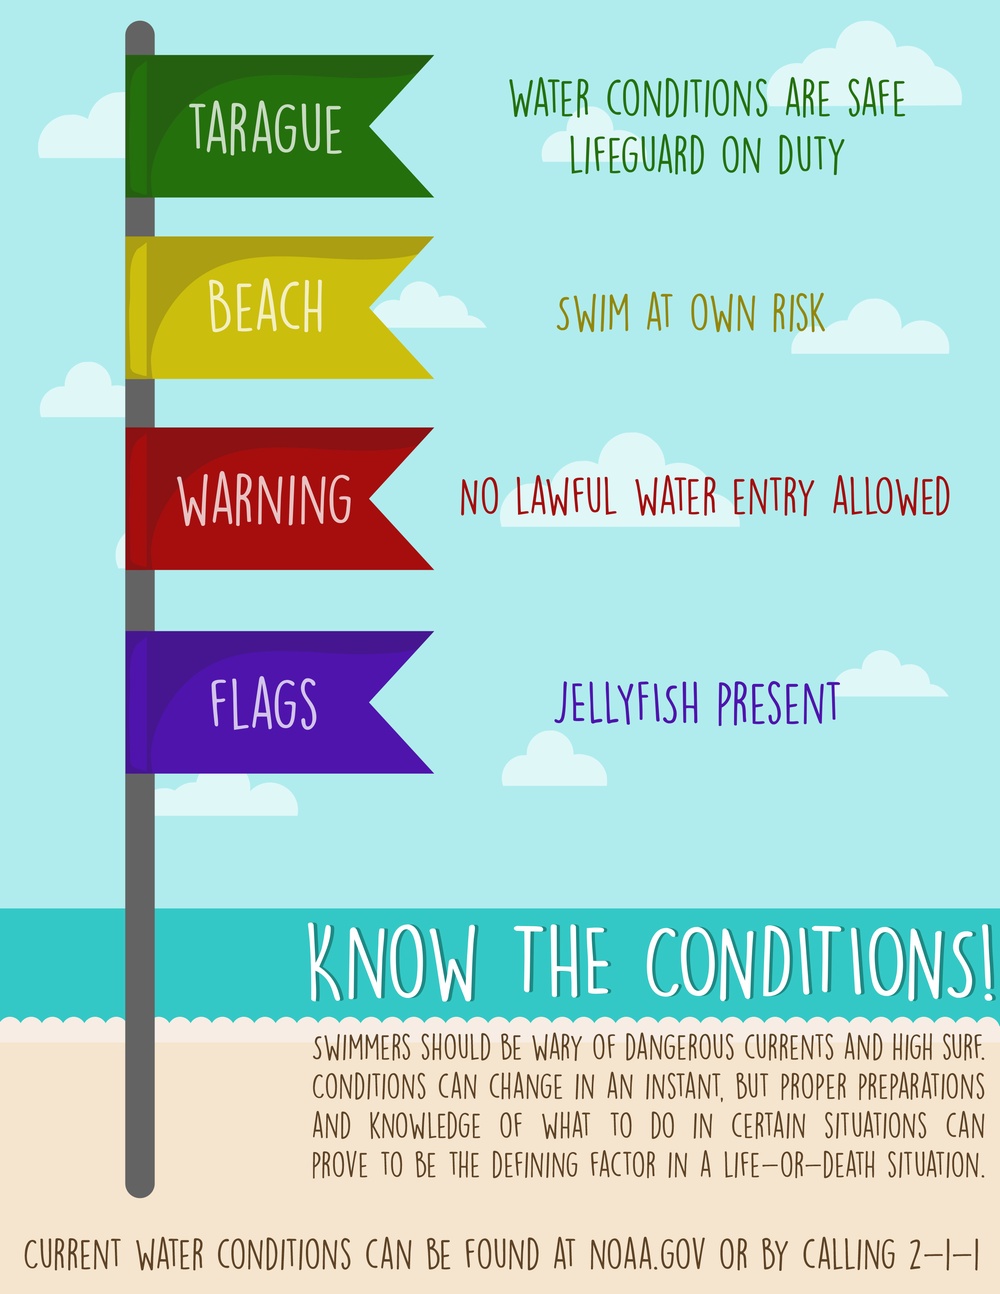 Know water conditions to enjoy beaches safely